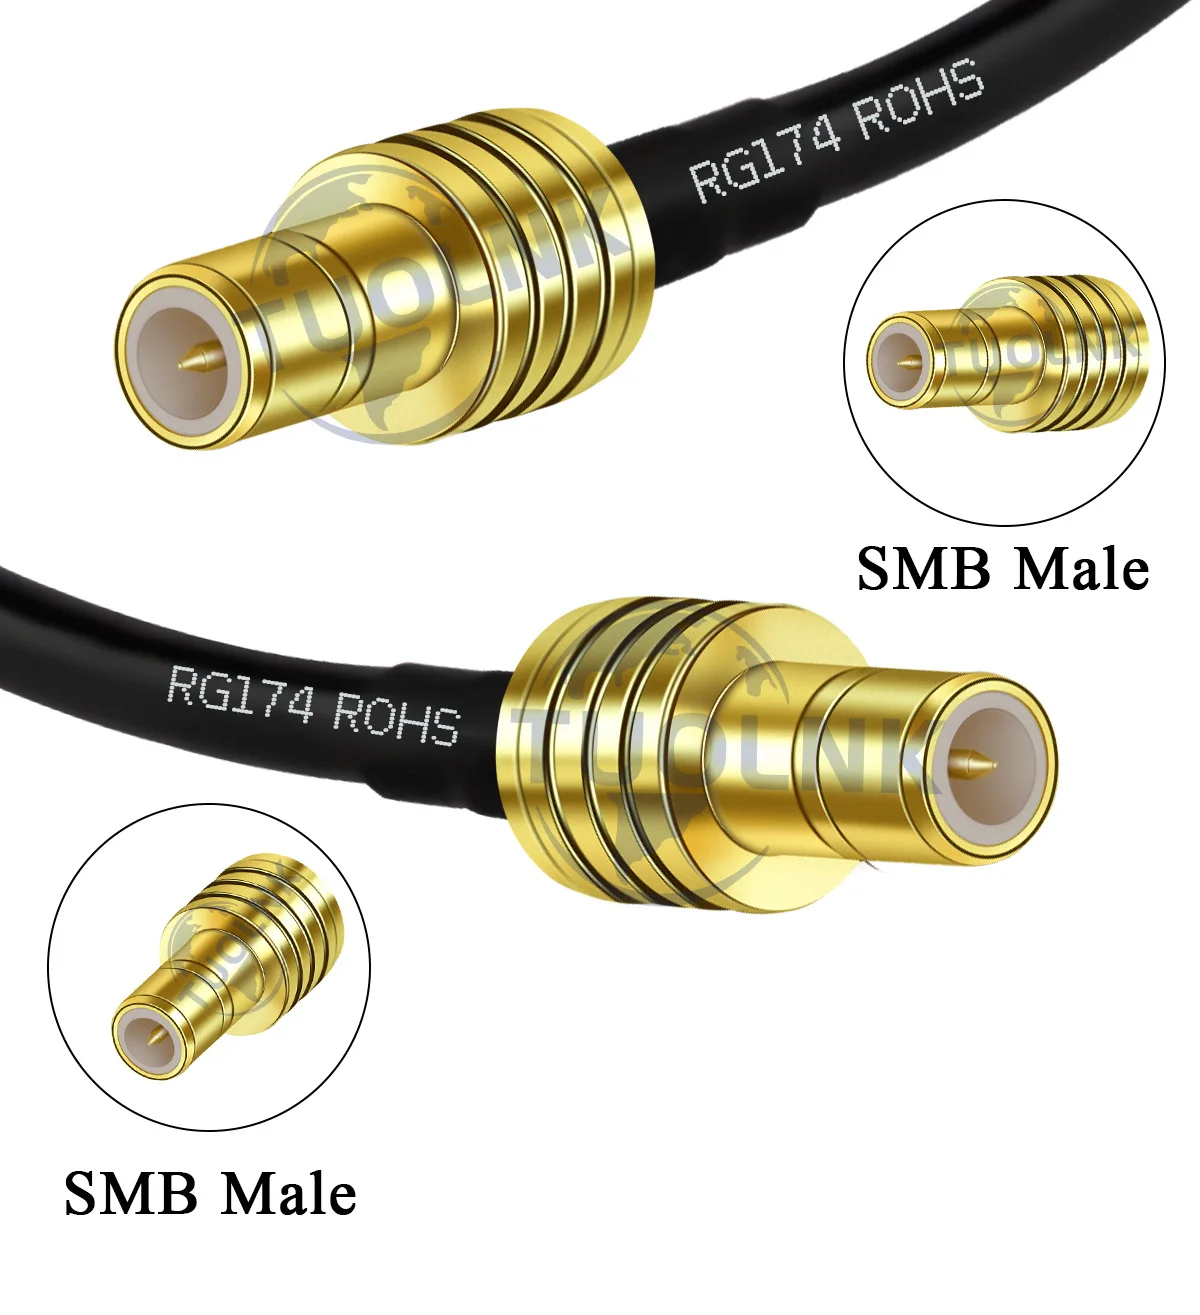 RG174 Coax Cable SMB Male to Female Right Angle Connector Cable for Sirius Satellite Radio Home Car Radio Stereo Receiver Tuner